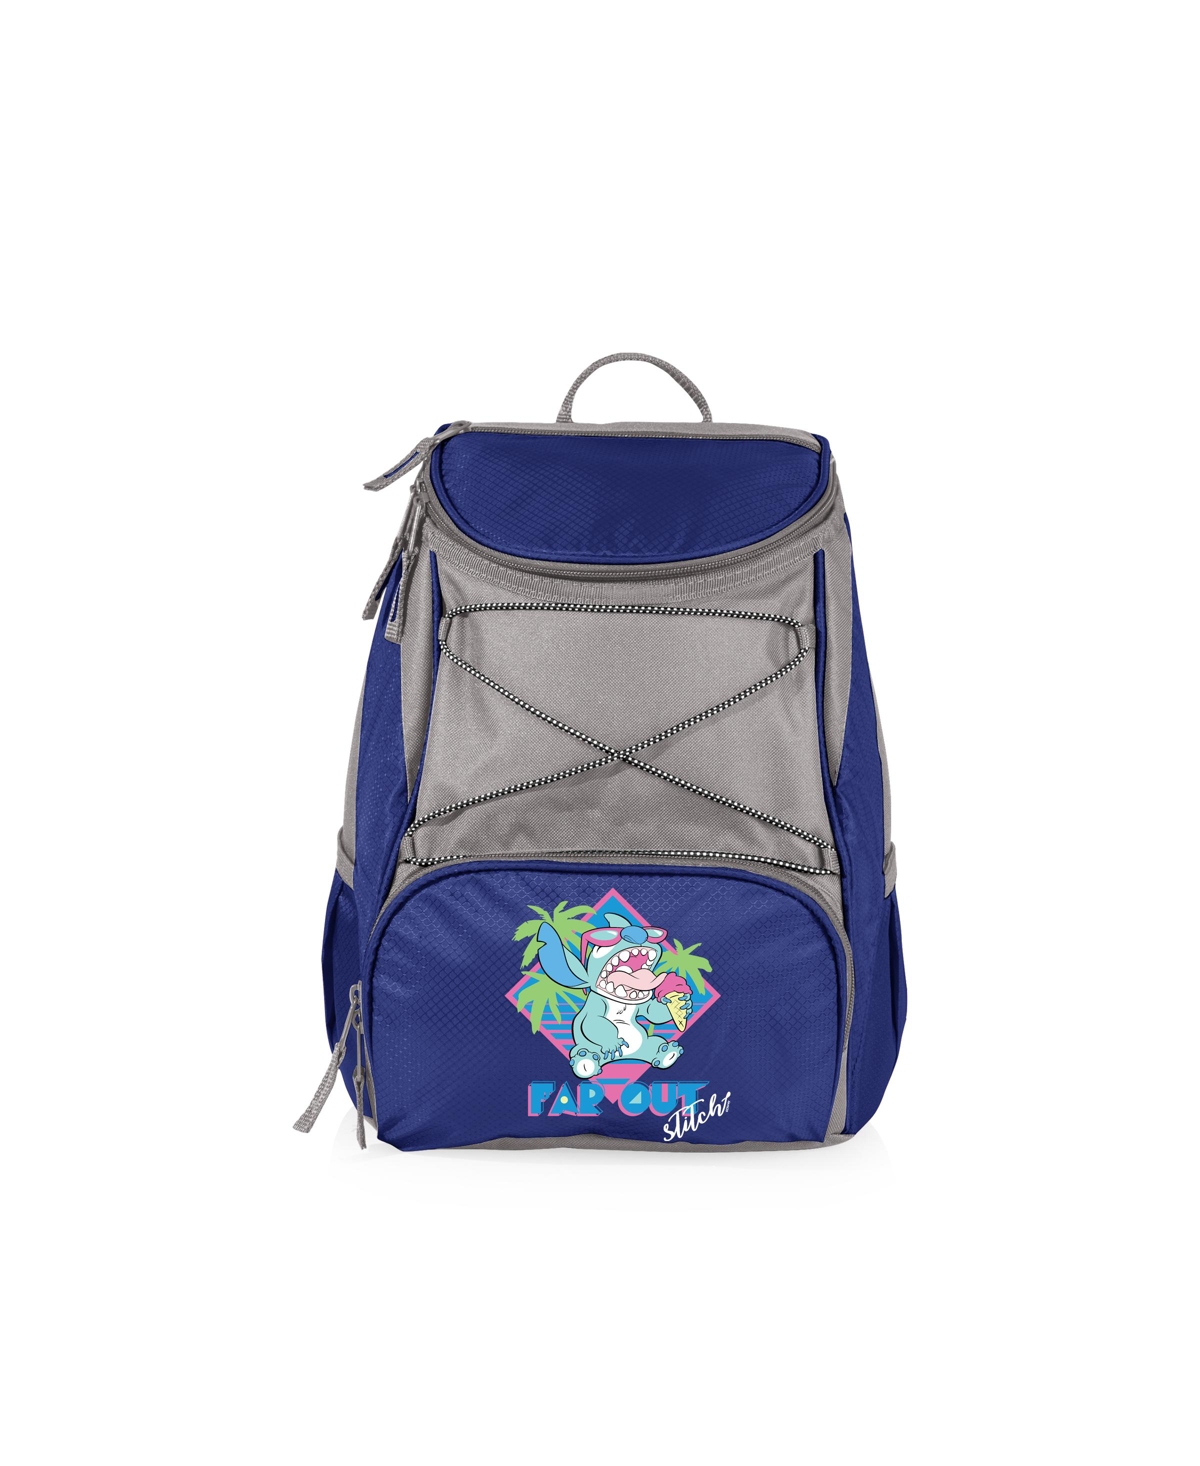 Oniva by Picnic Time Disney's Lilo & Stich Ptx Backpack Cooler - Navy Blue